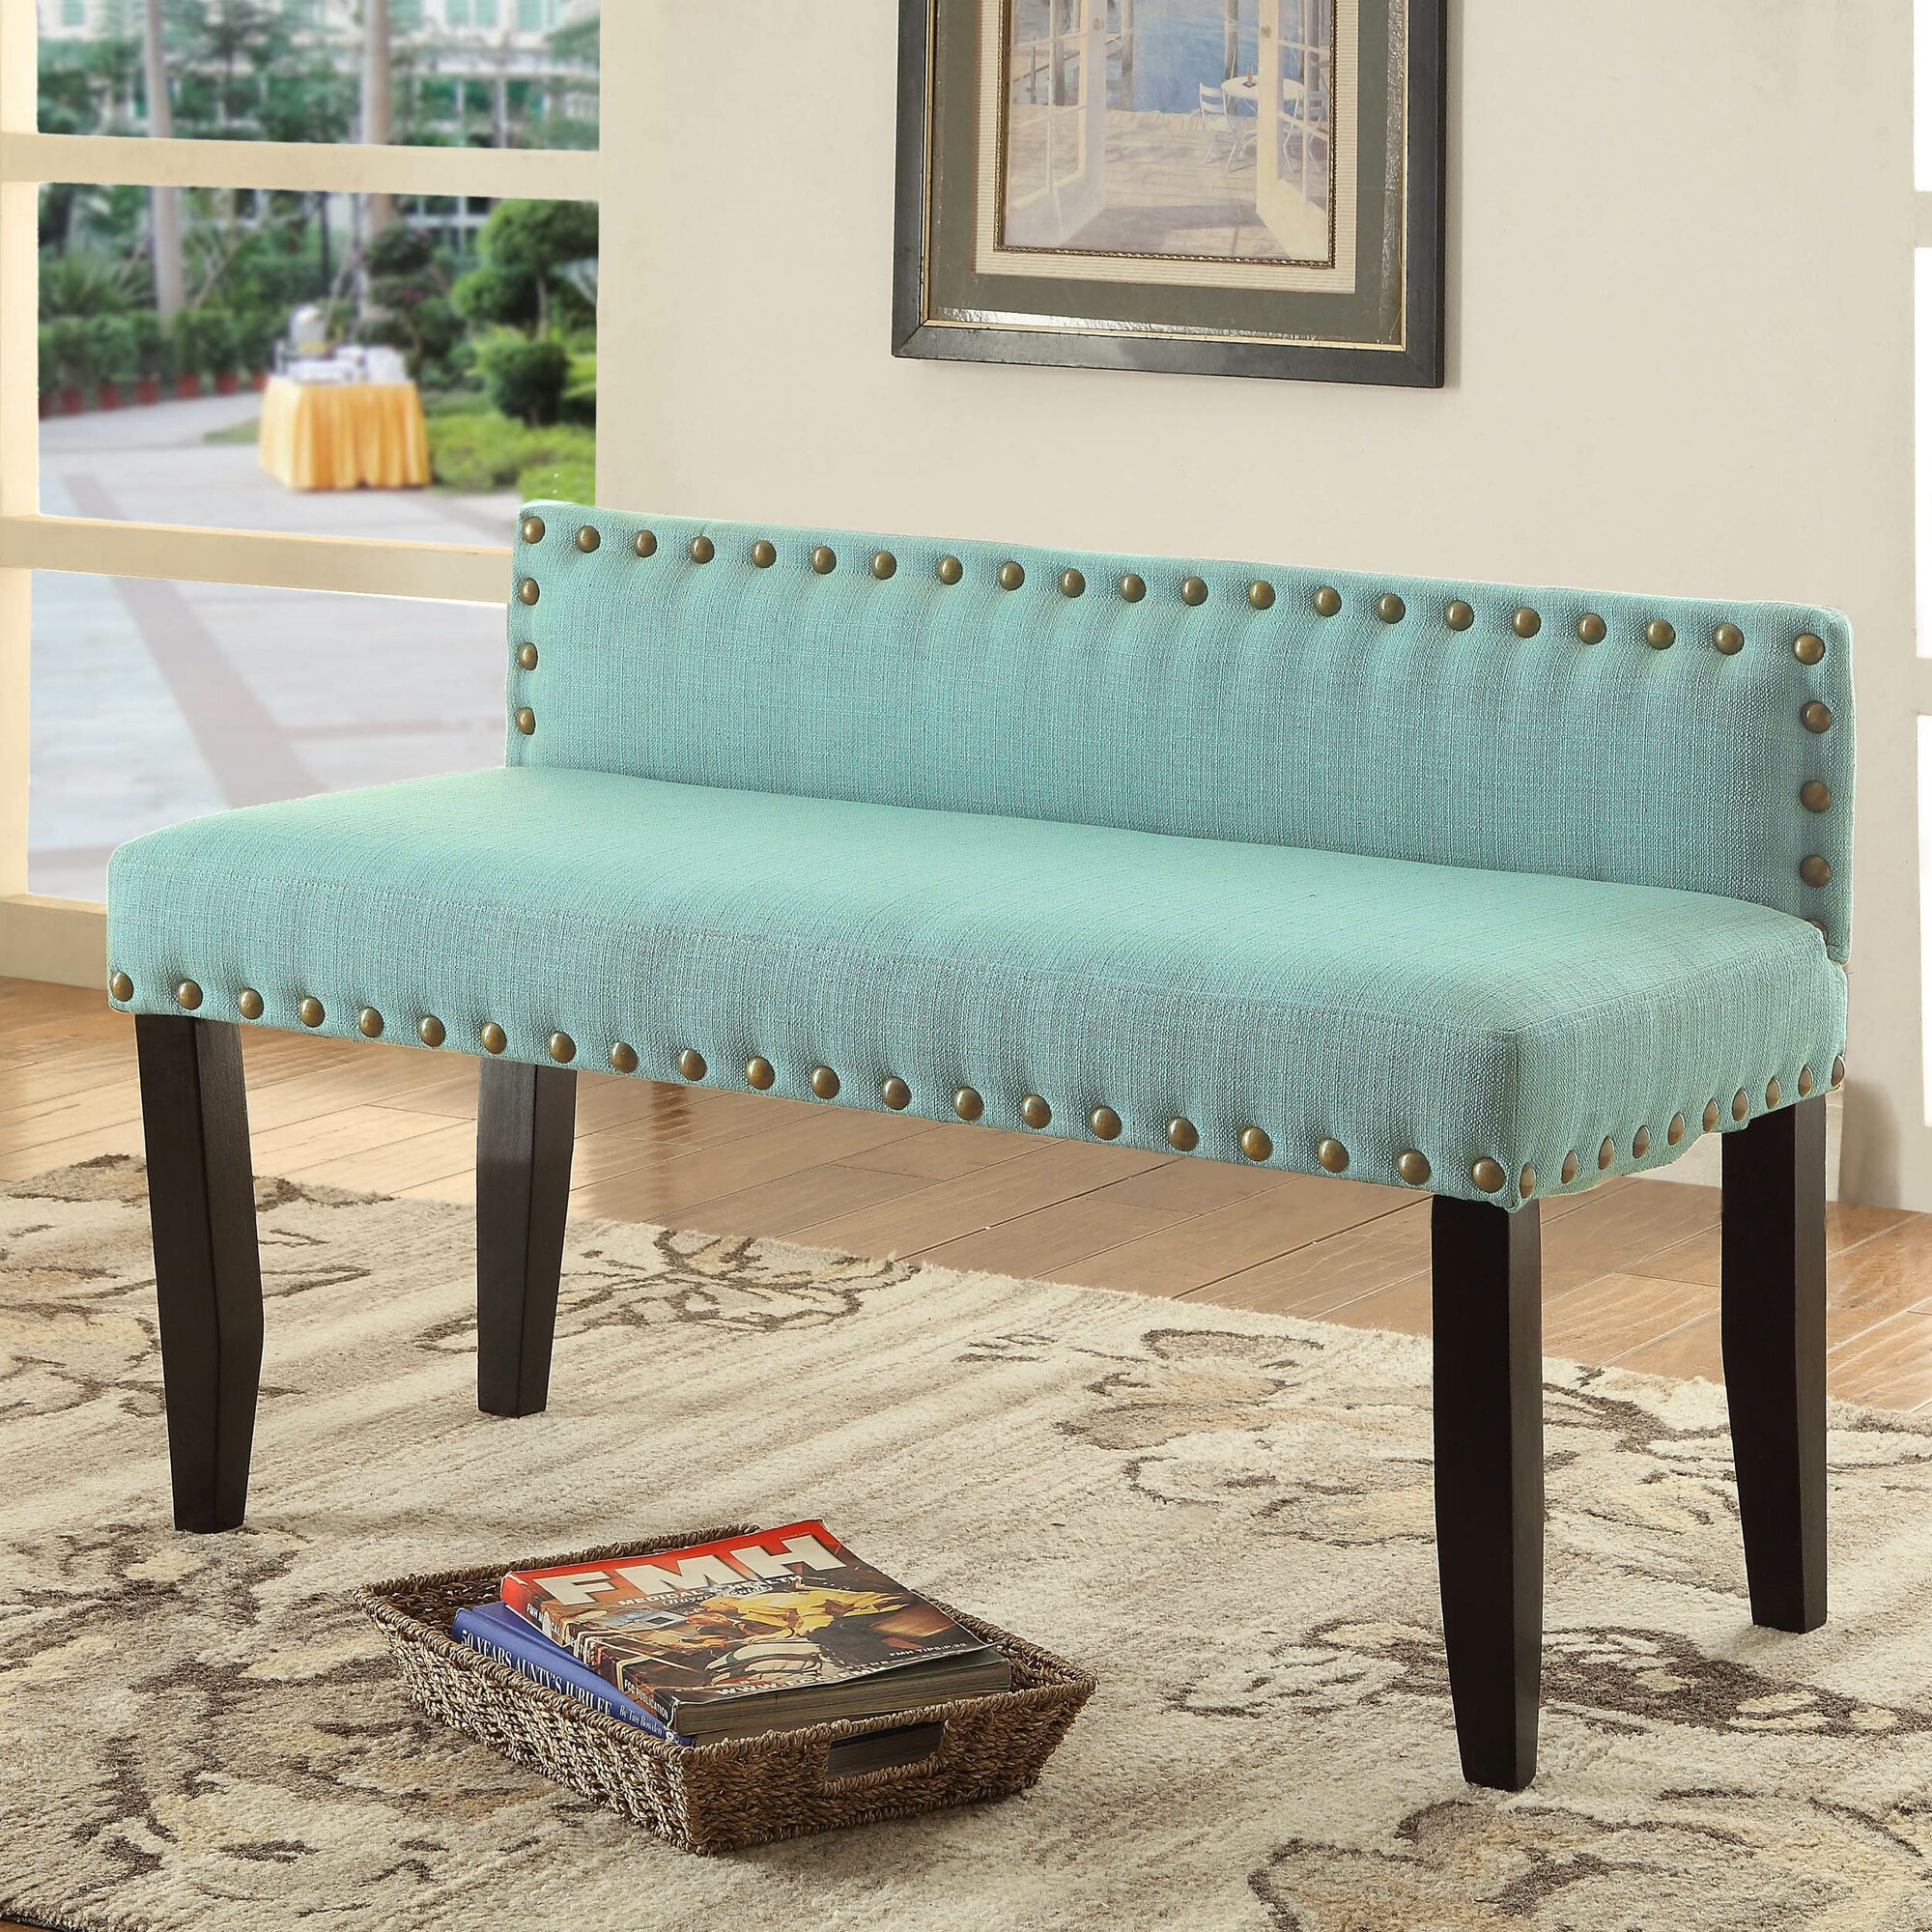 Bedroom Upholstered Bench: A Timeless Piece Of Furniture